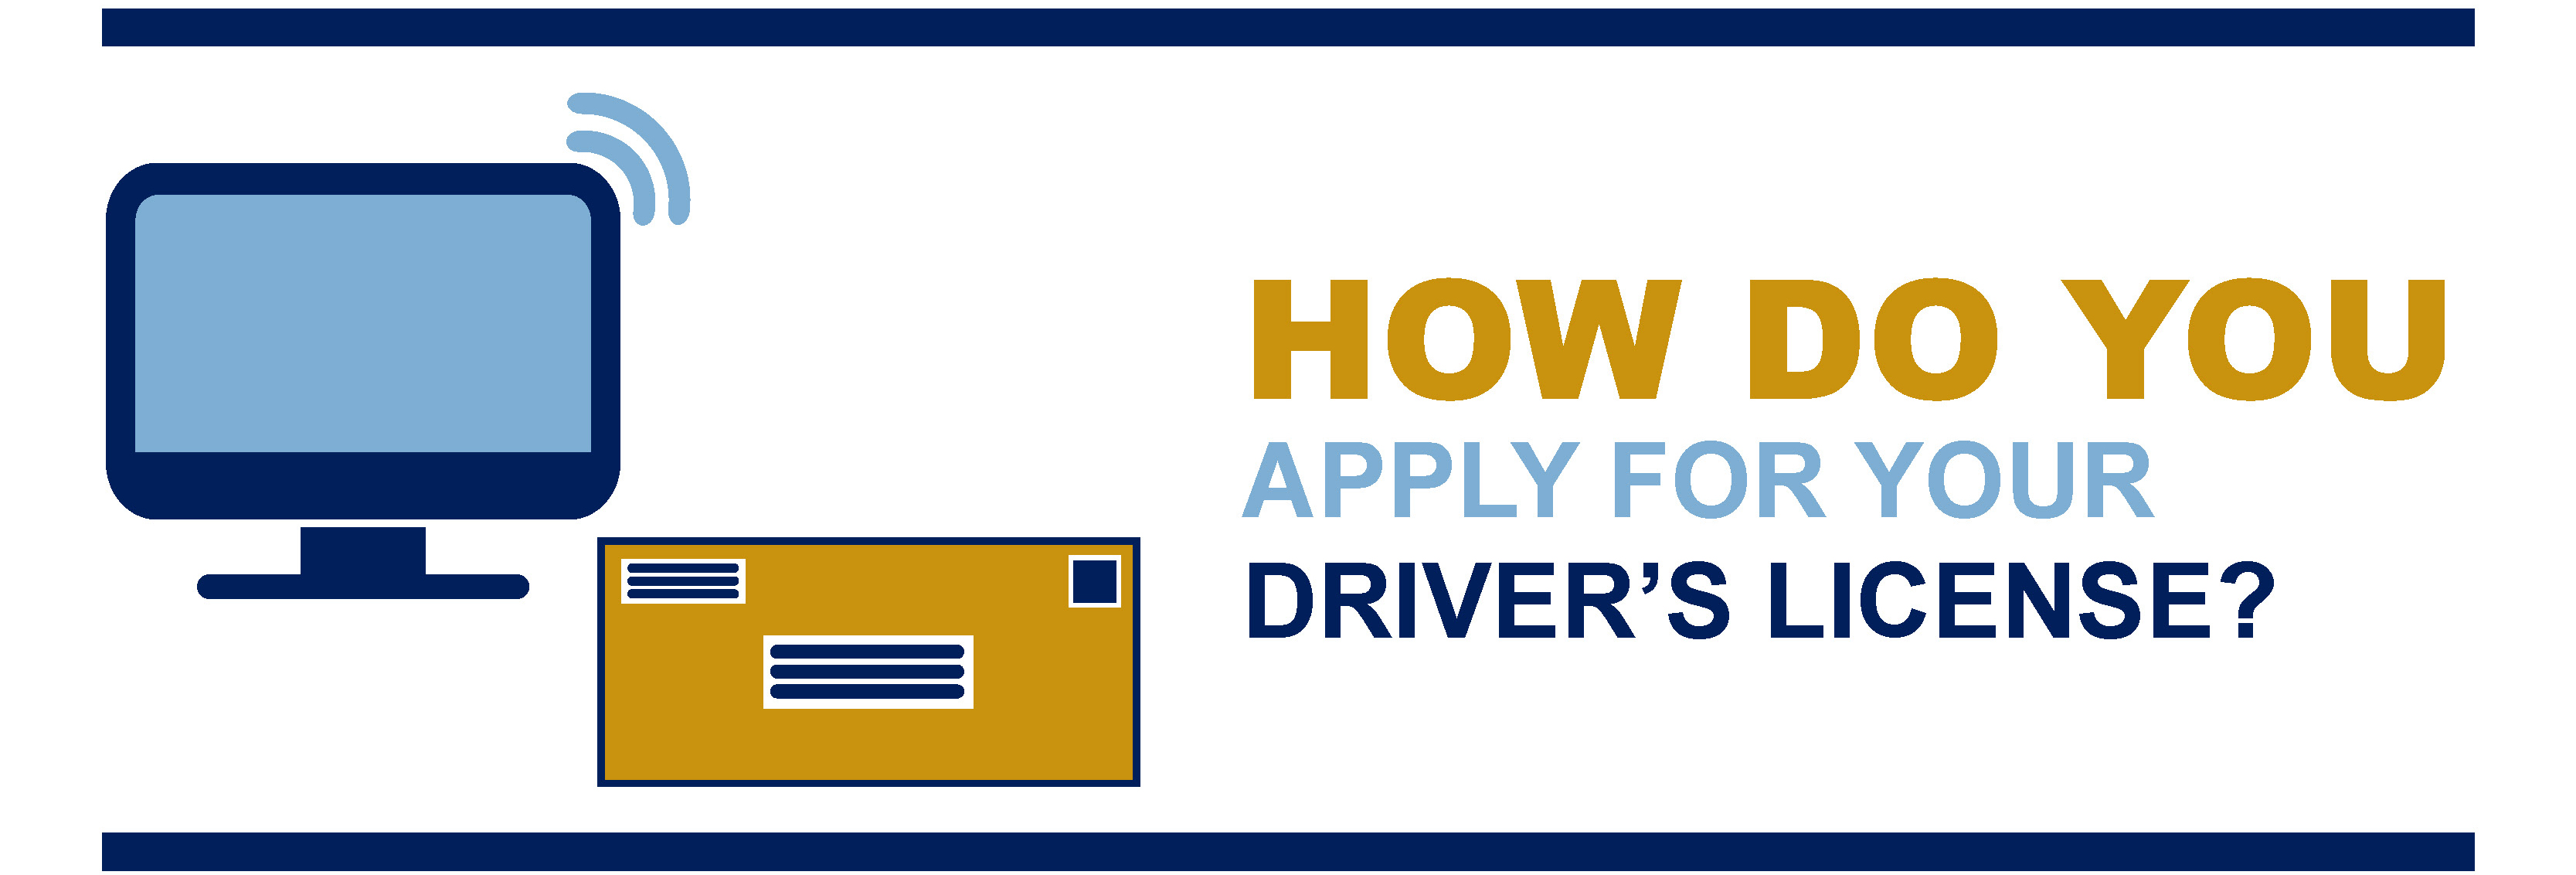 how do you apply for your driver's license graphic